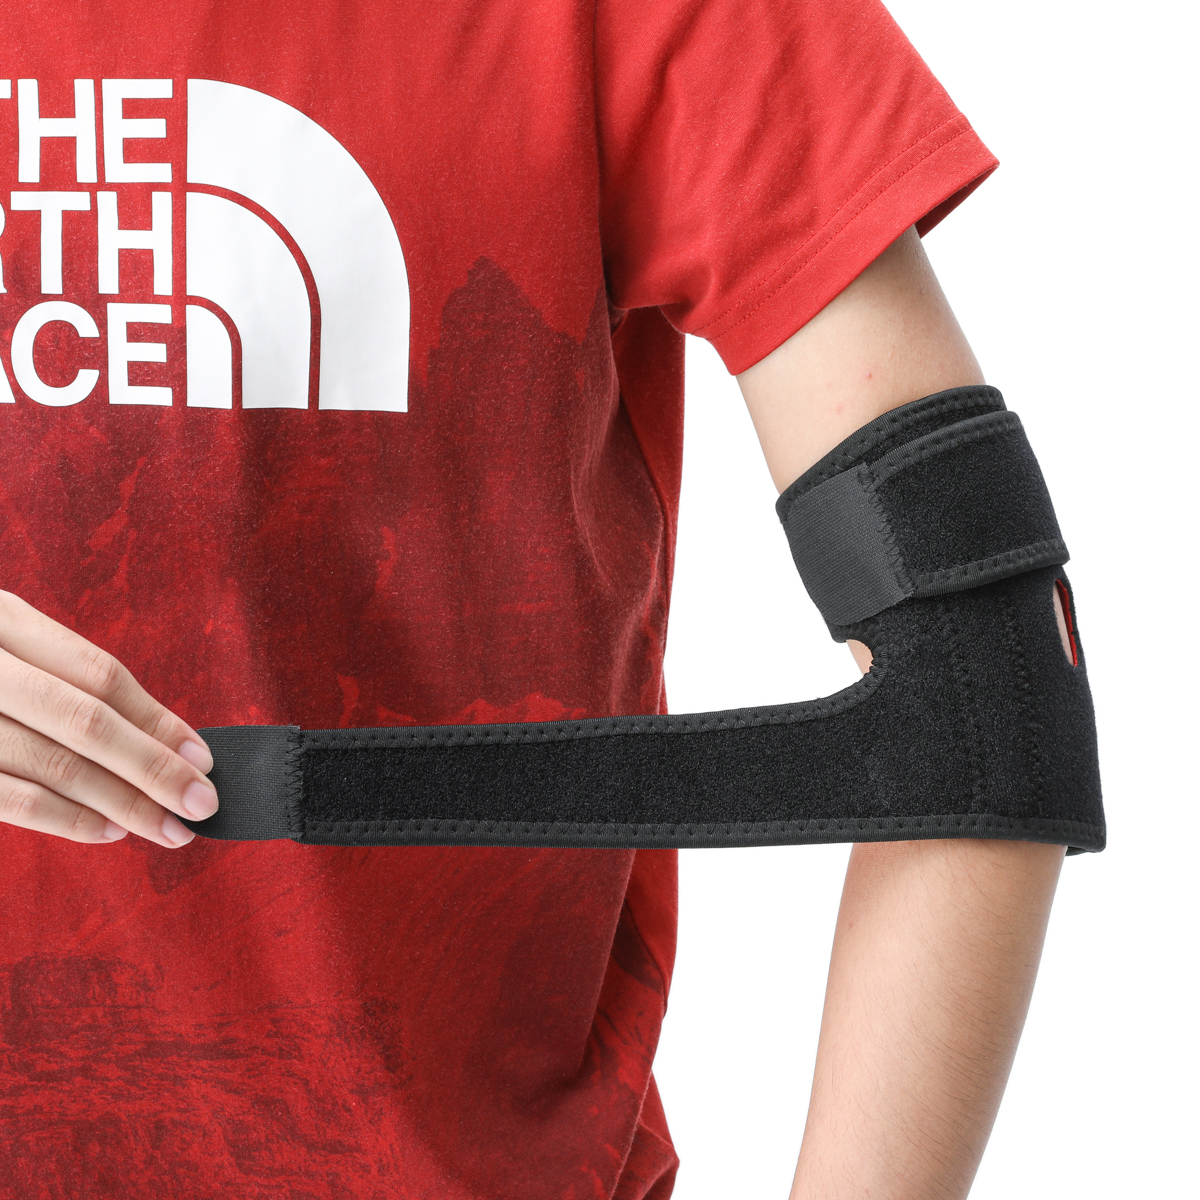 Adjustable-Elbow-Brace-Breathable-Neoprene-Support-with-Dual-Spring-Stabilisers-Arm-Wrap-Elbow-Strap-1648965-2